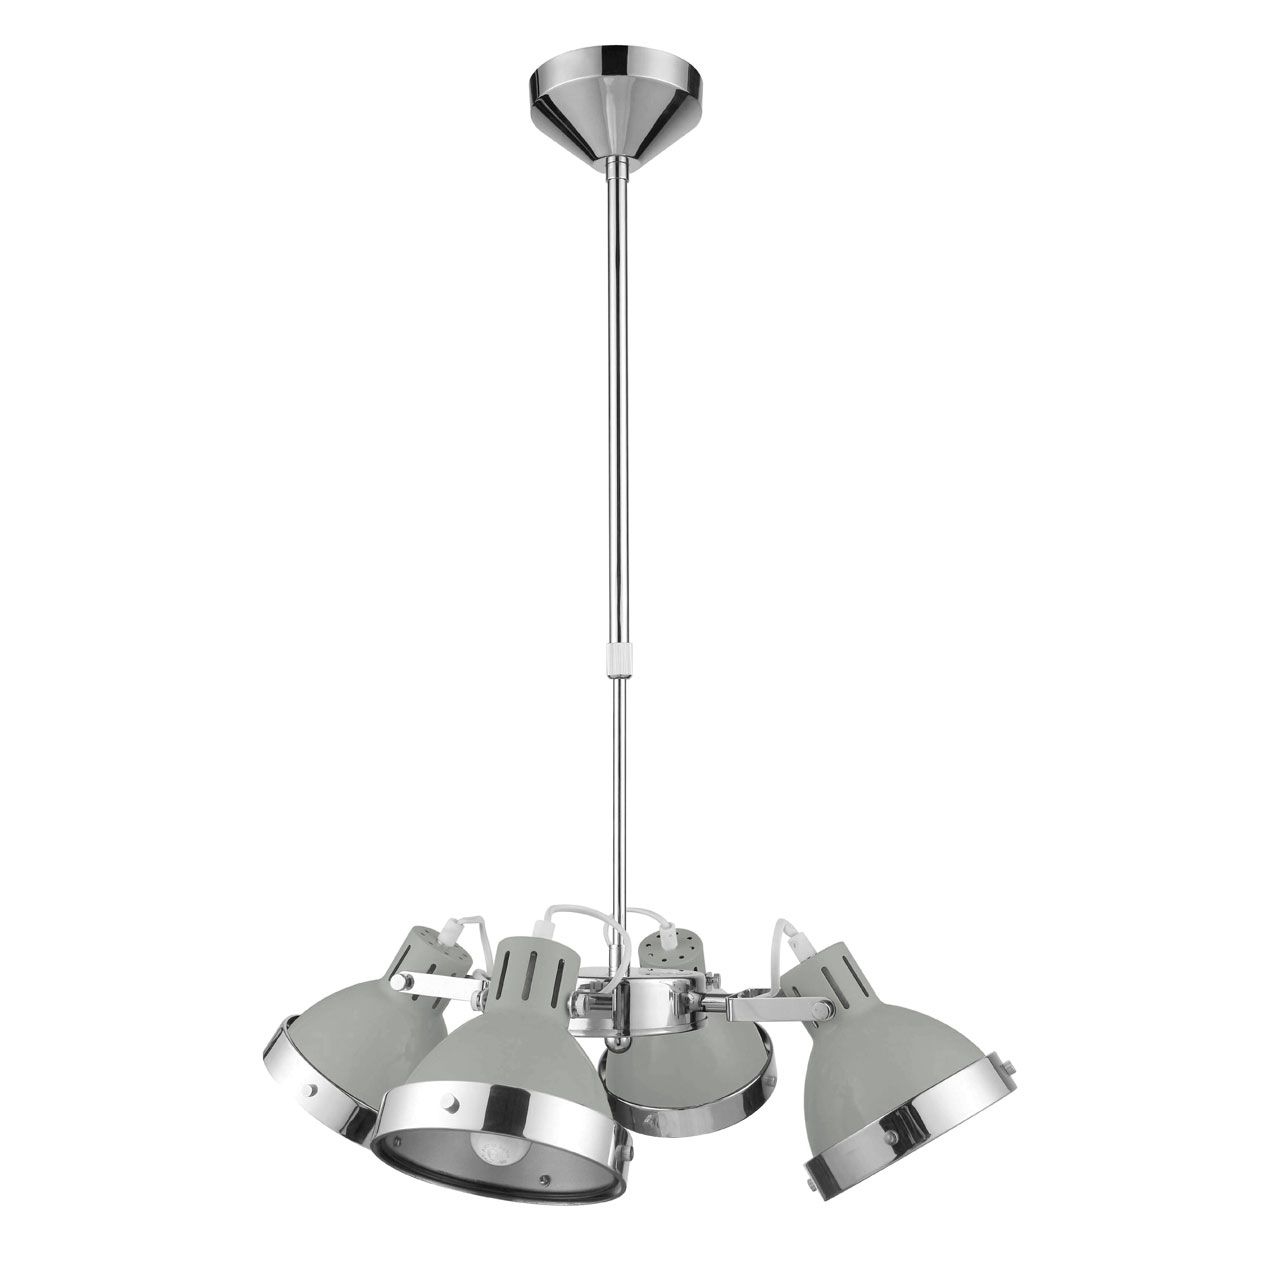 Hexon Contemporary 4 Metal Shades Ceiling Pendant Light In Grey And Chrome